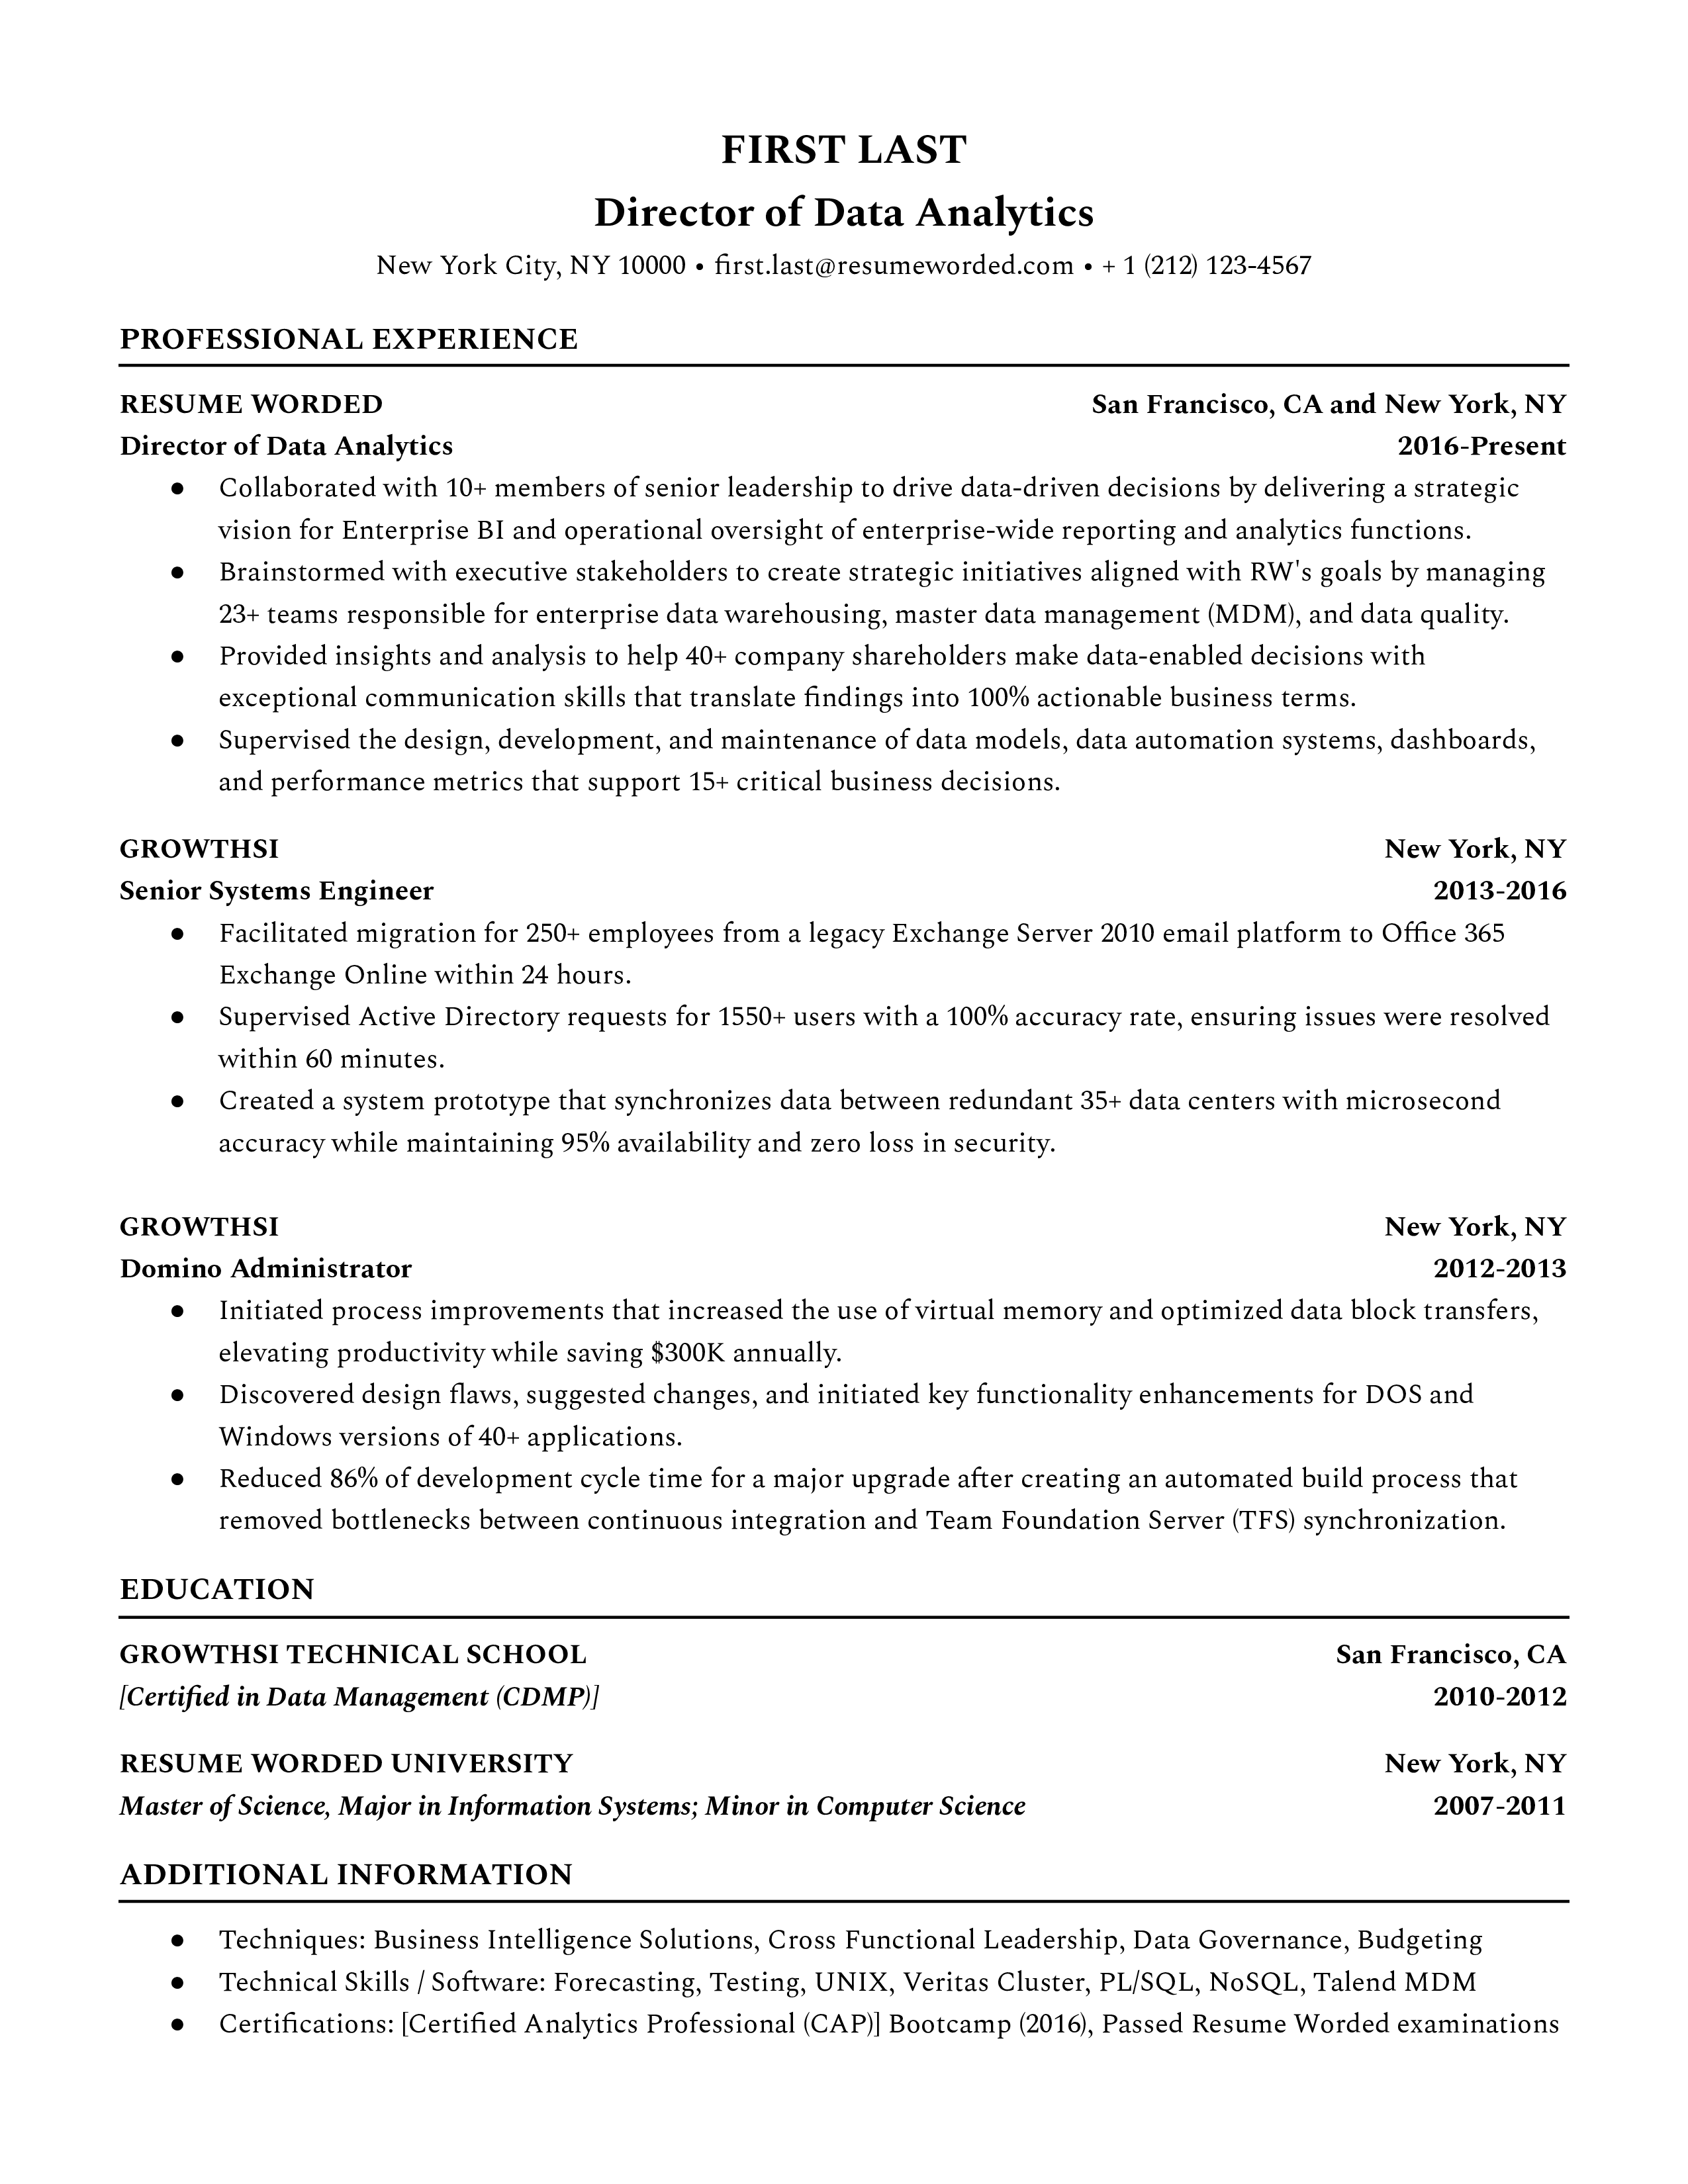 A CV snapshot illustrating key skills and experiences for a Director of Data Analytics role.